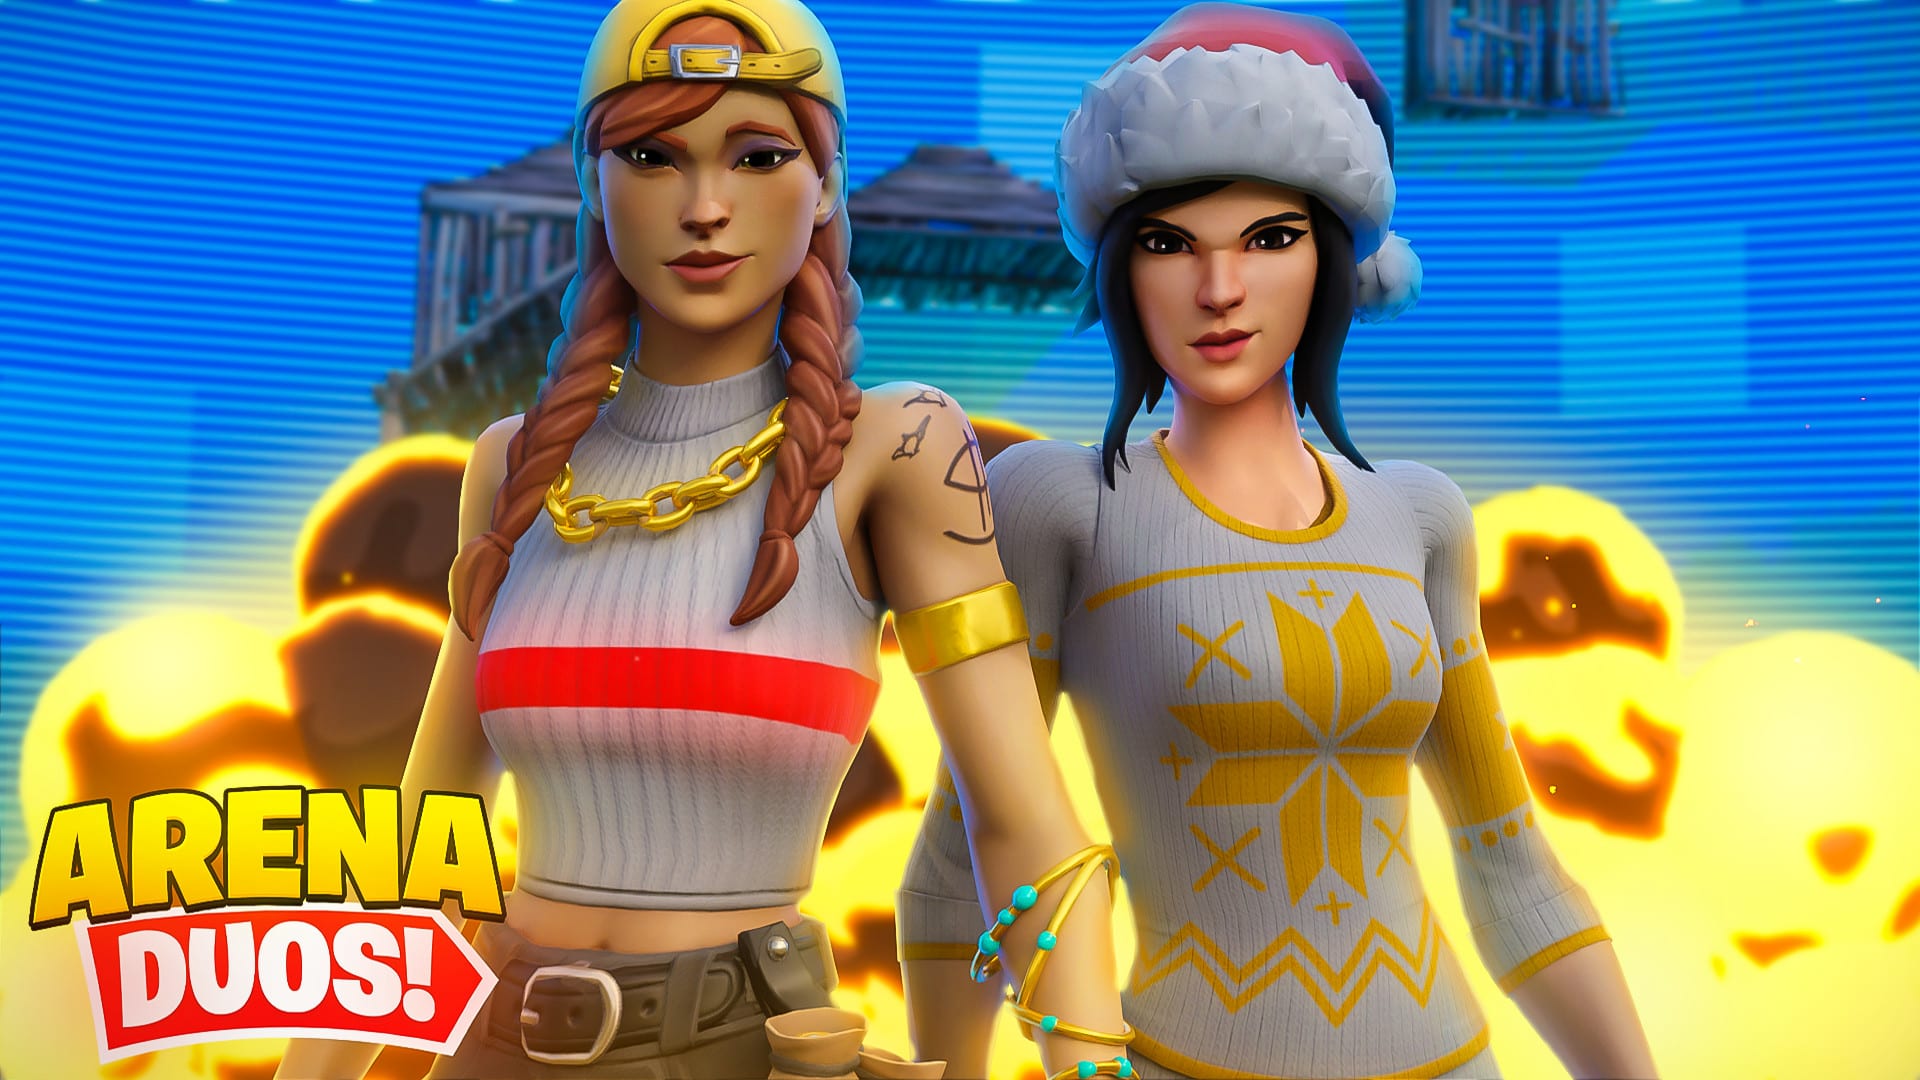 Make You A Fortnite Thumbnail For Youtube By Jamesgrossdzn Fiverr